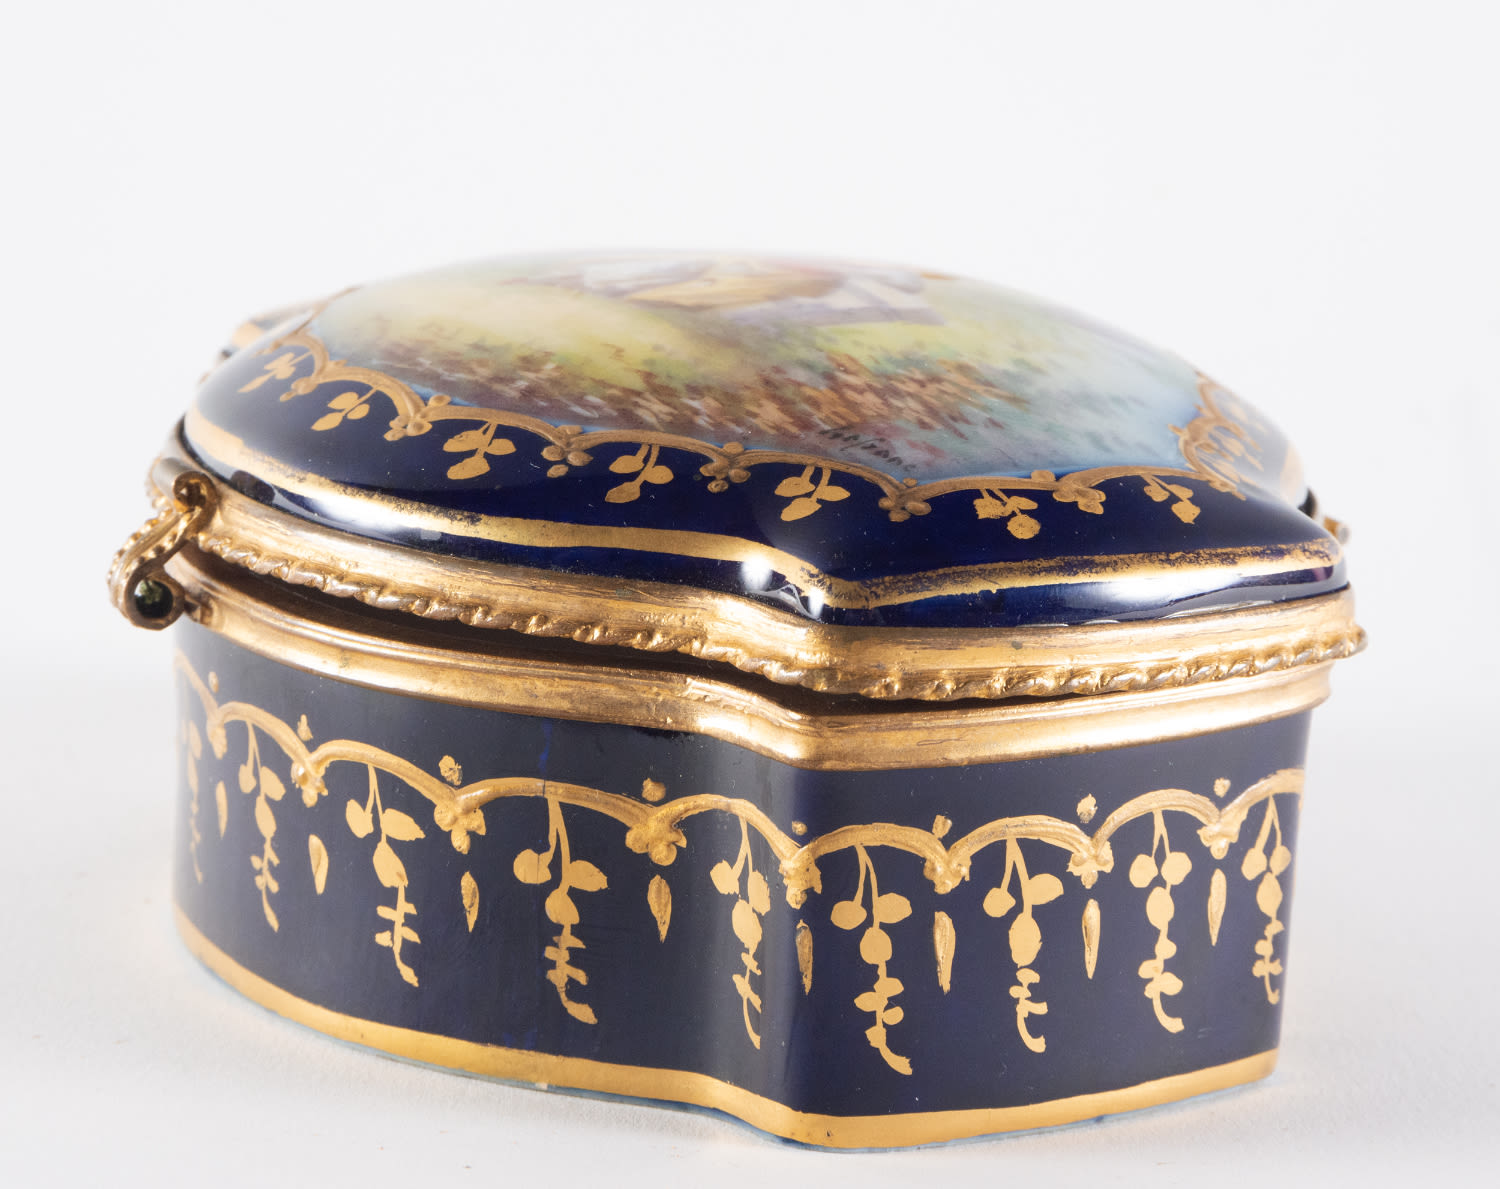 Enamelled Sèvres porcelain jewelry box, 19th century, Tuileries series - Image 3 of 5